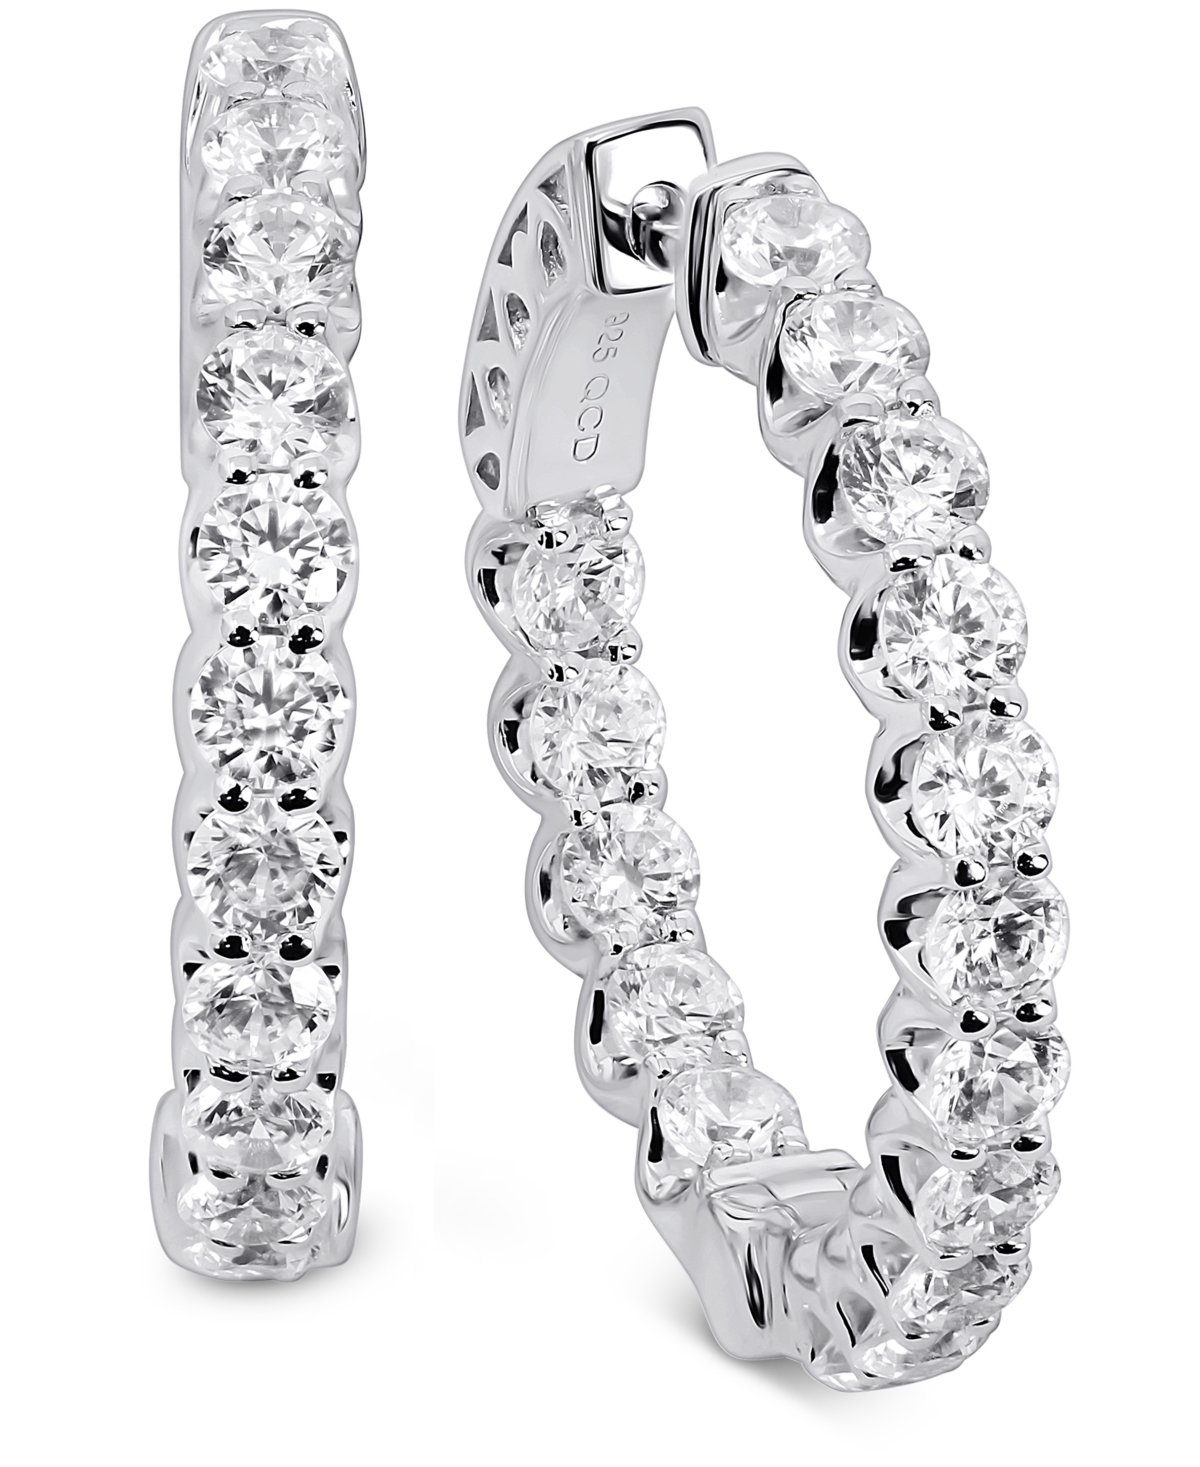 Cubic Zirconia Small In & Out Hoop Earrings in Sterling Silver or 18k Gold Plated Sterling Silver - Sterling Silver